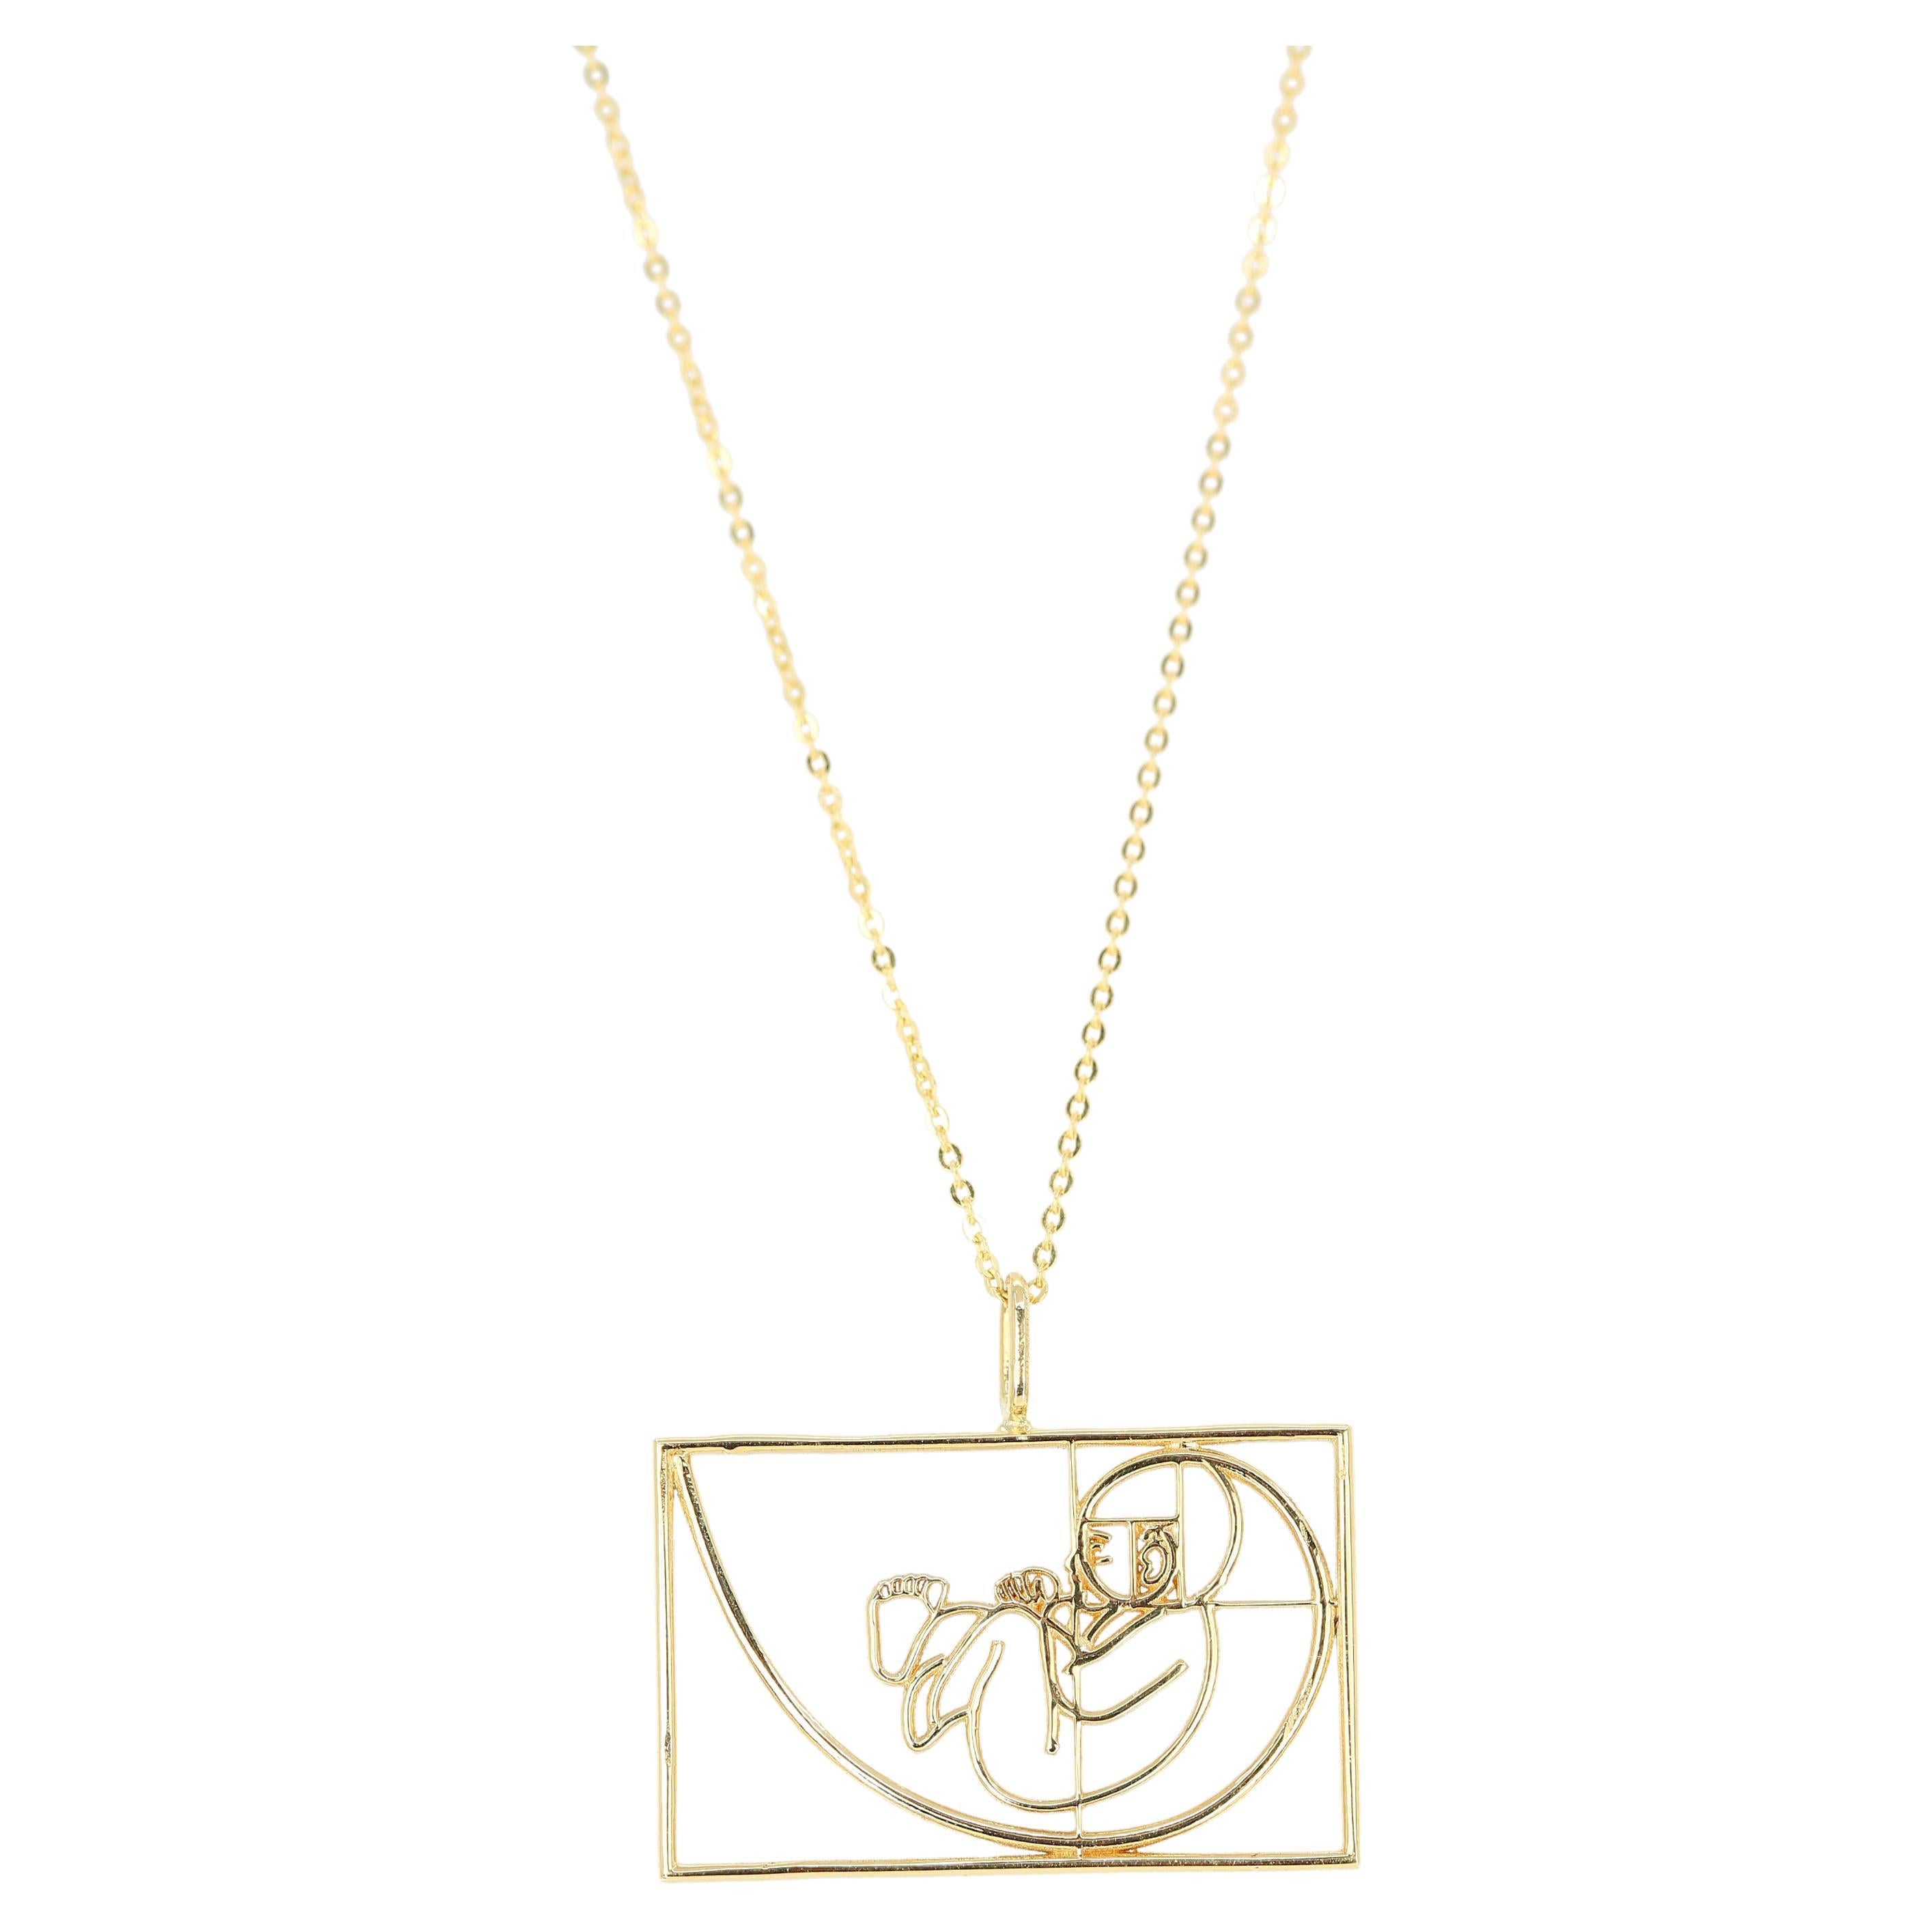 Baby in the womb Necklace with Pendant made of 14K Gold - Golden Ratio Necklace - Inspired by Leonardo Fibonacci - Professional Designer Necklace created by hands from every parts and every details. 

This necklace inspired by Leonardo Fibonacci's